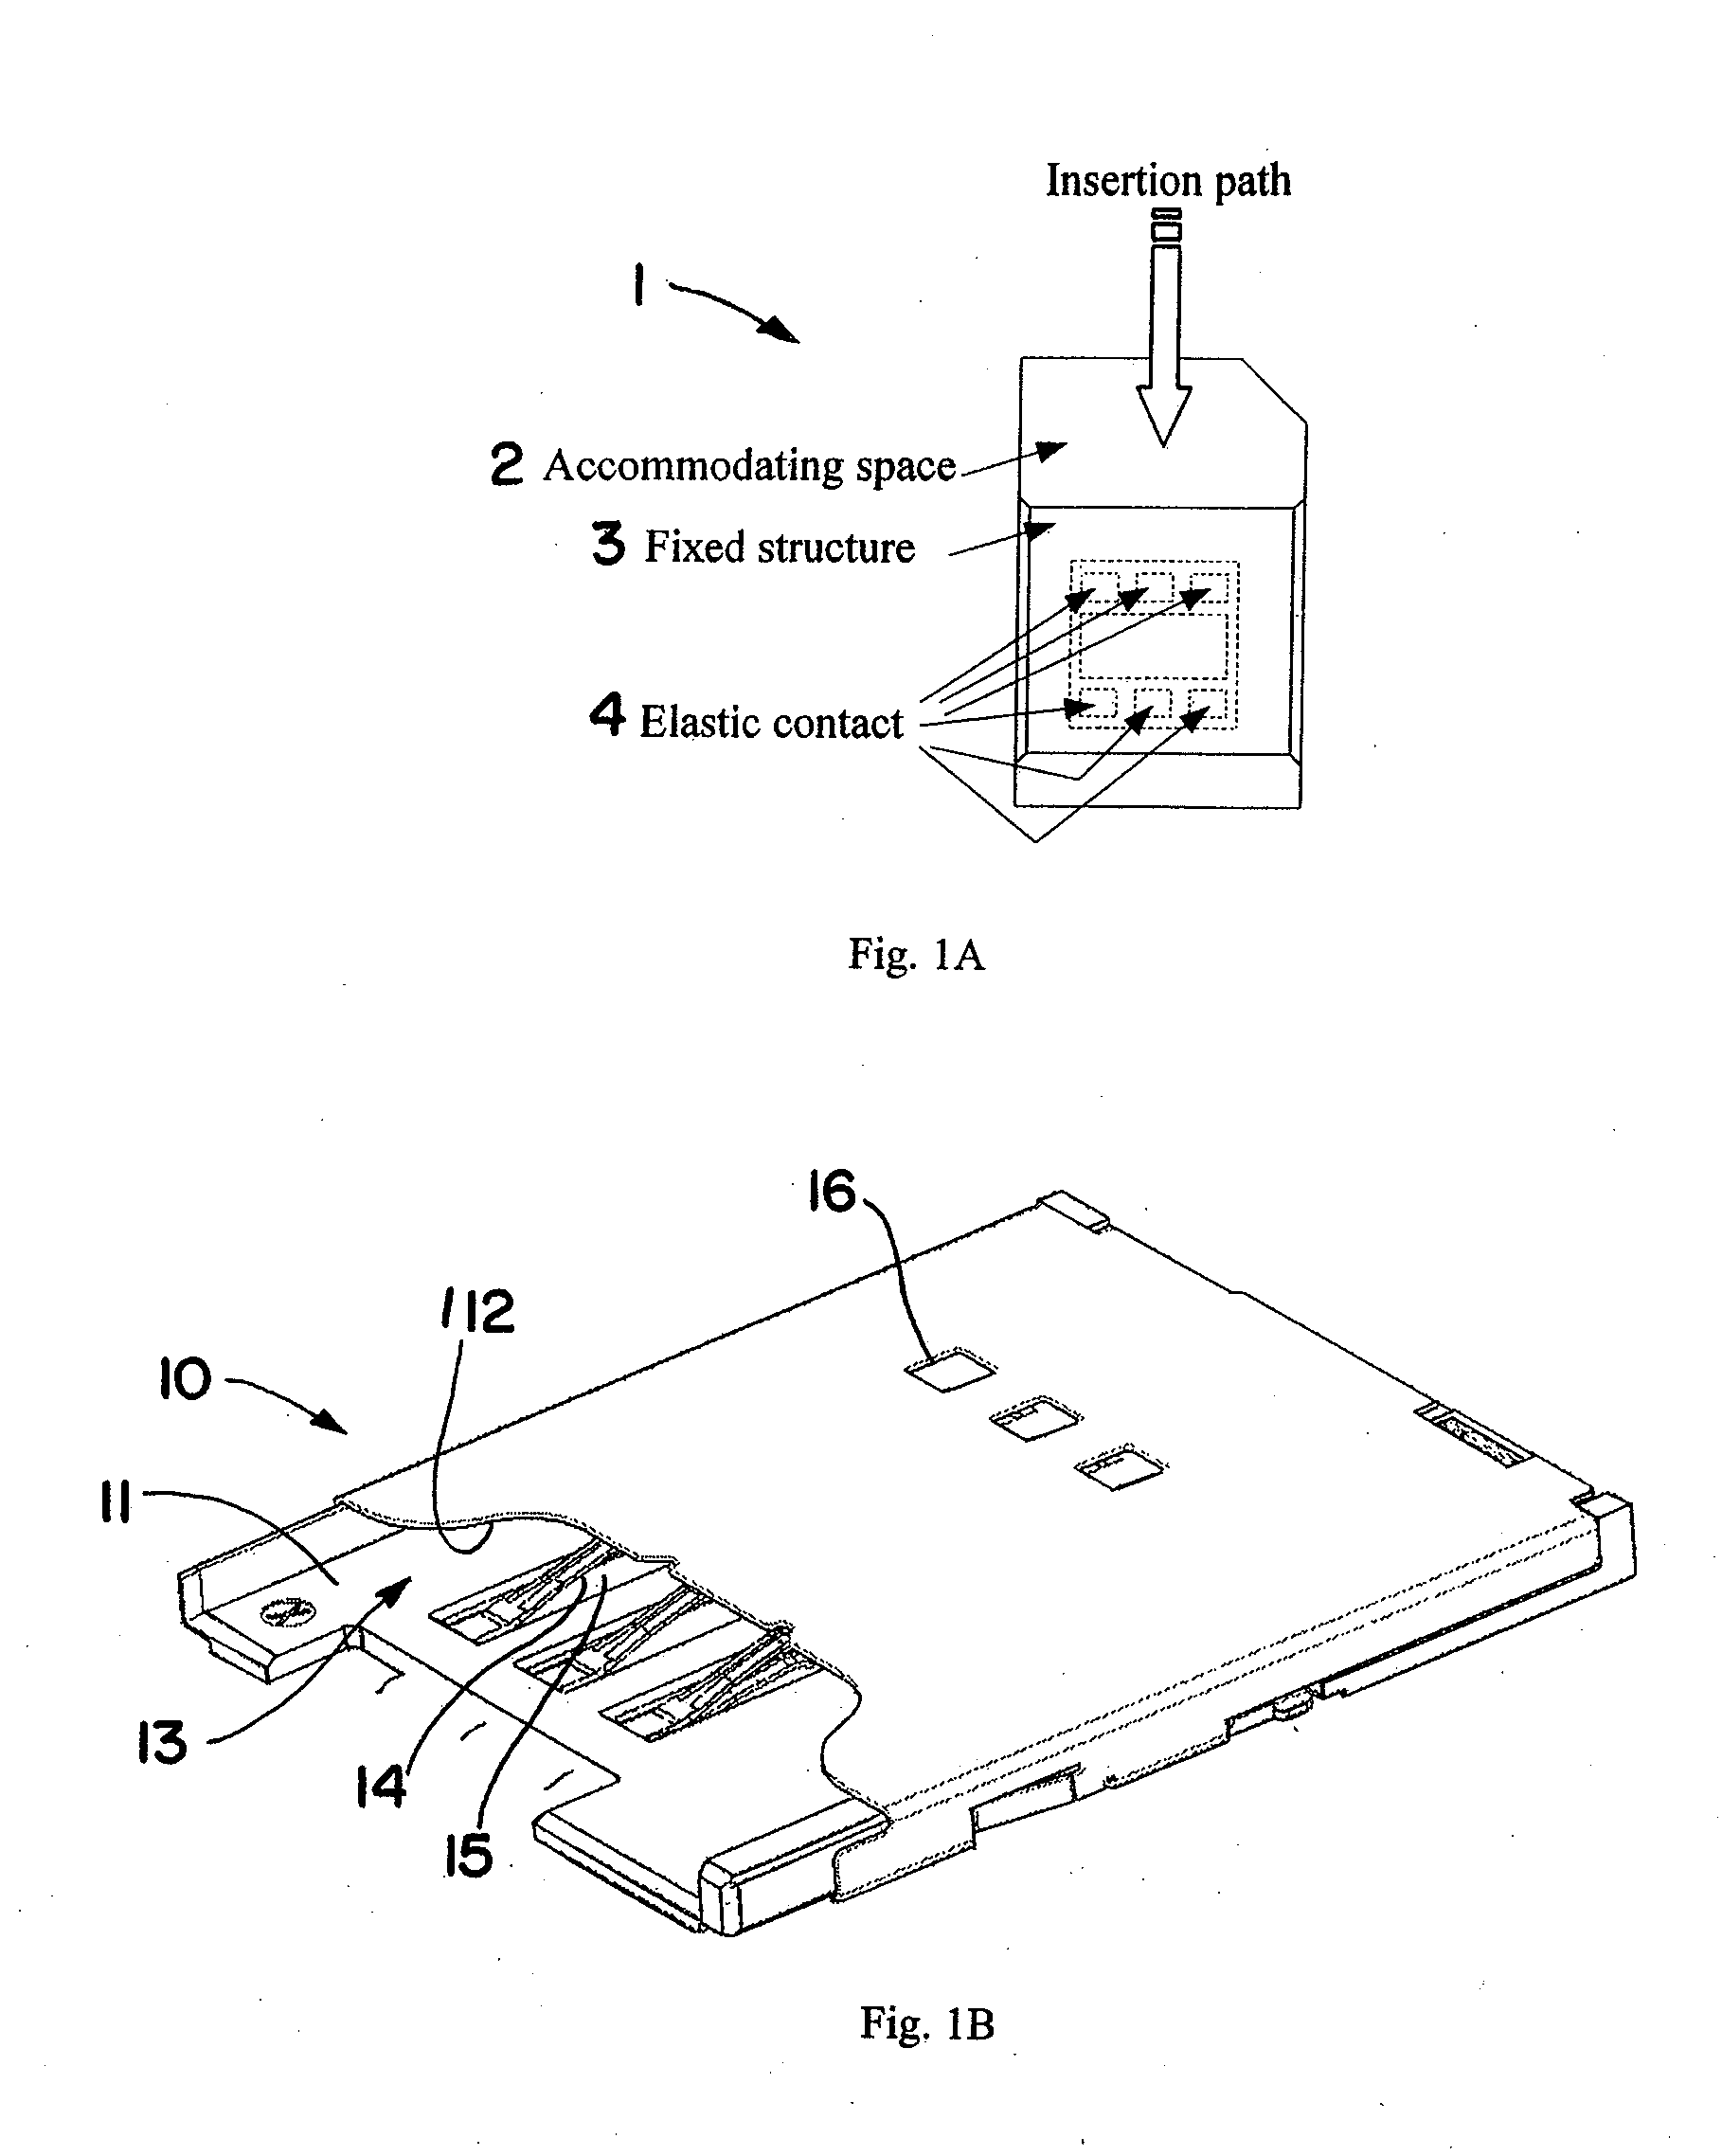 SIM Card Slot Having a Fool-proof Function and Electronic Apparatus Containing the SIM Card Slot